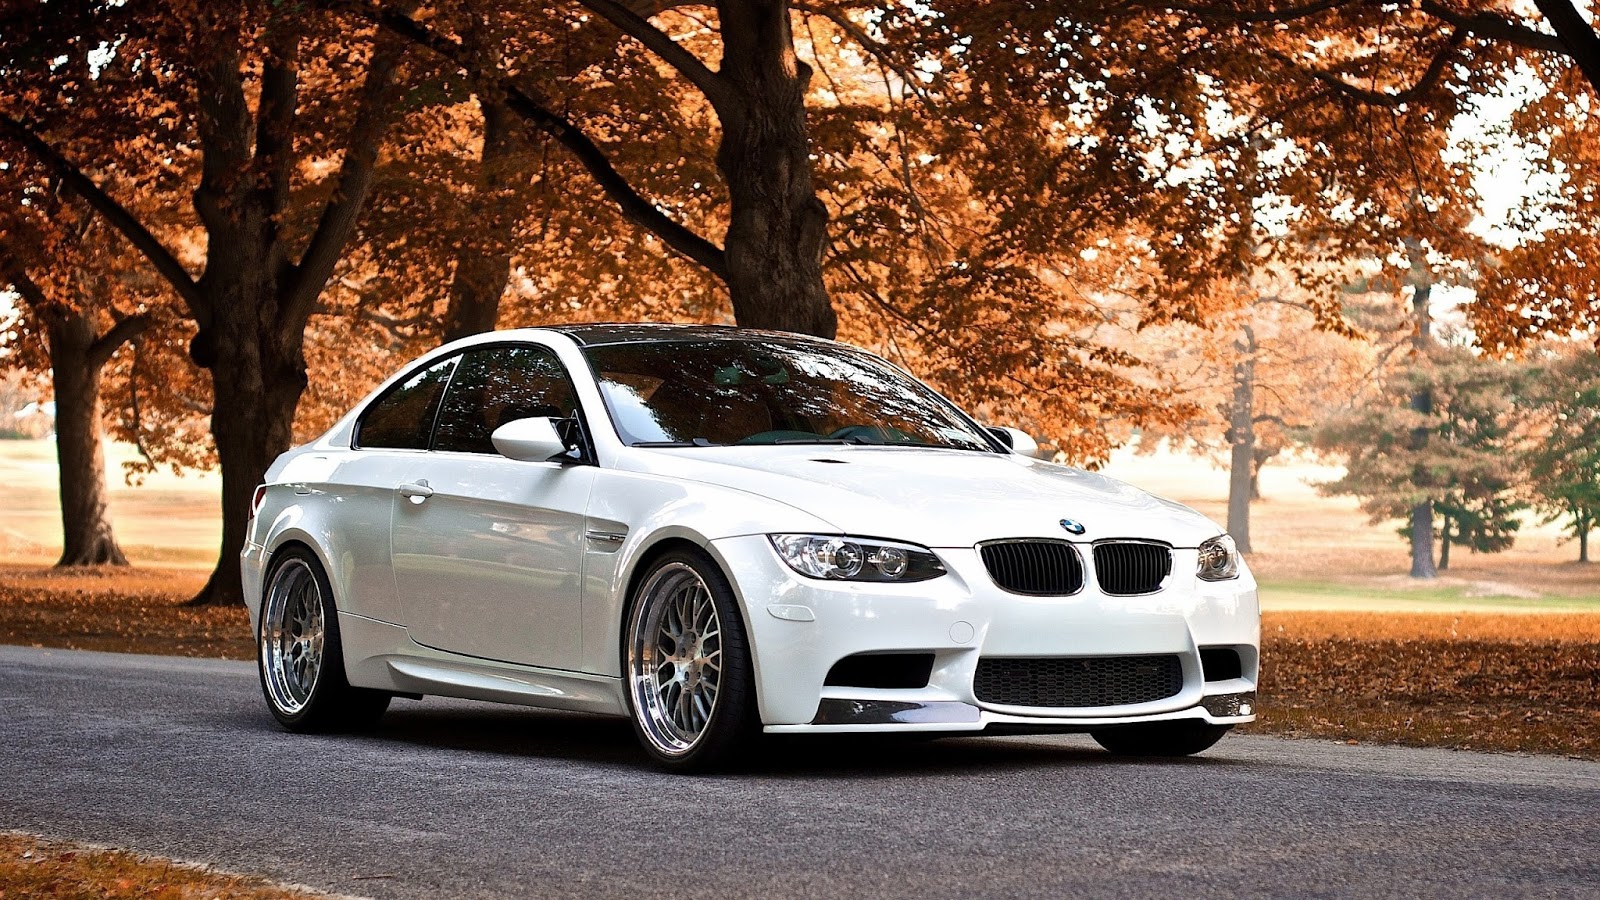 BMW Car Wallpapers, Download Free BMW Wallpapers  Most beautiful 